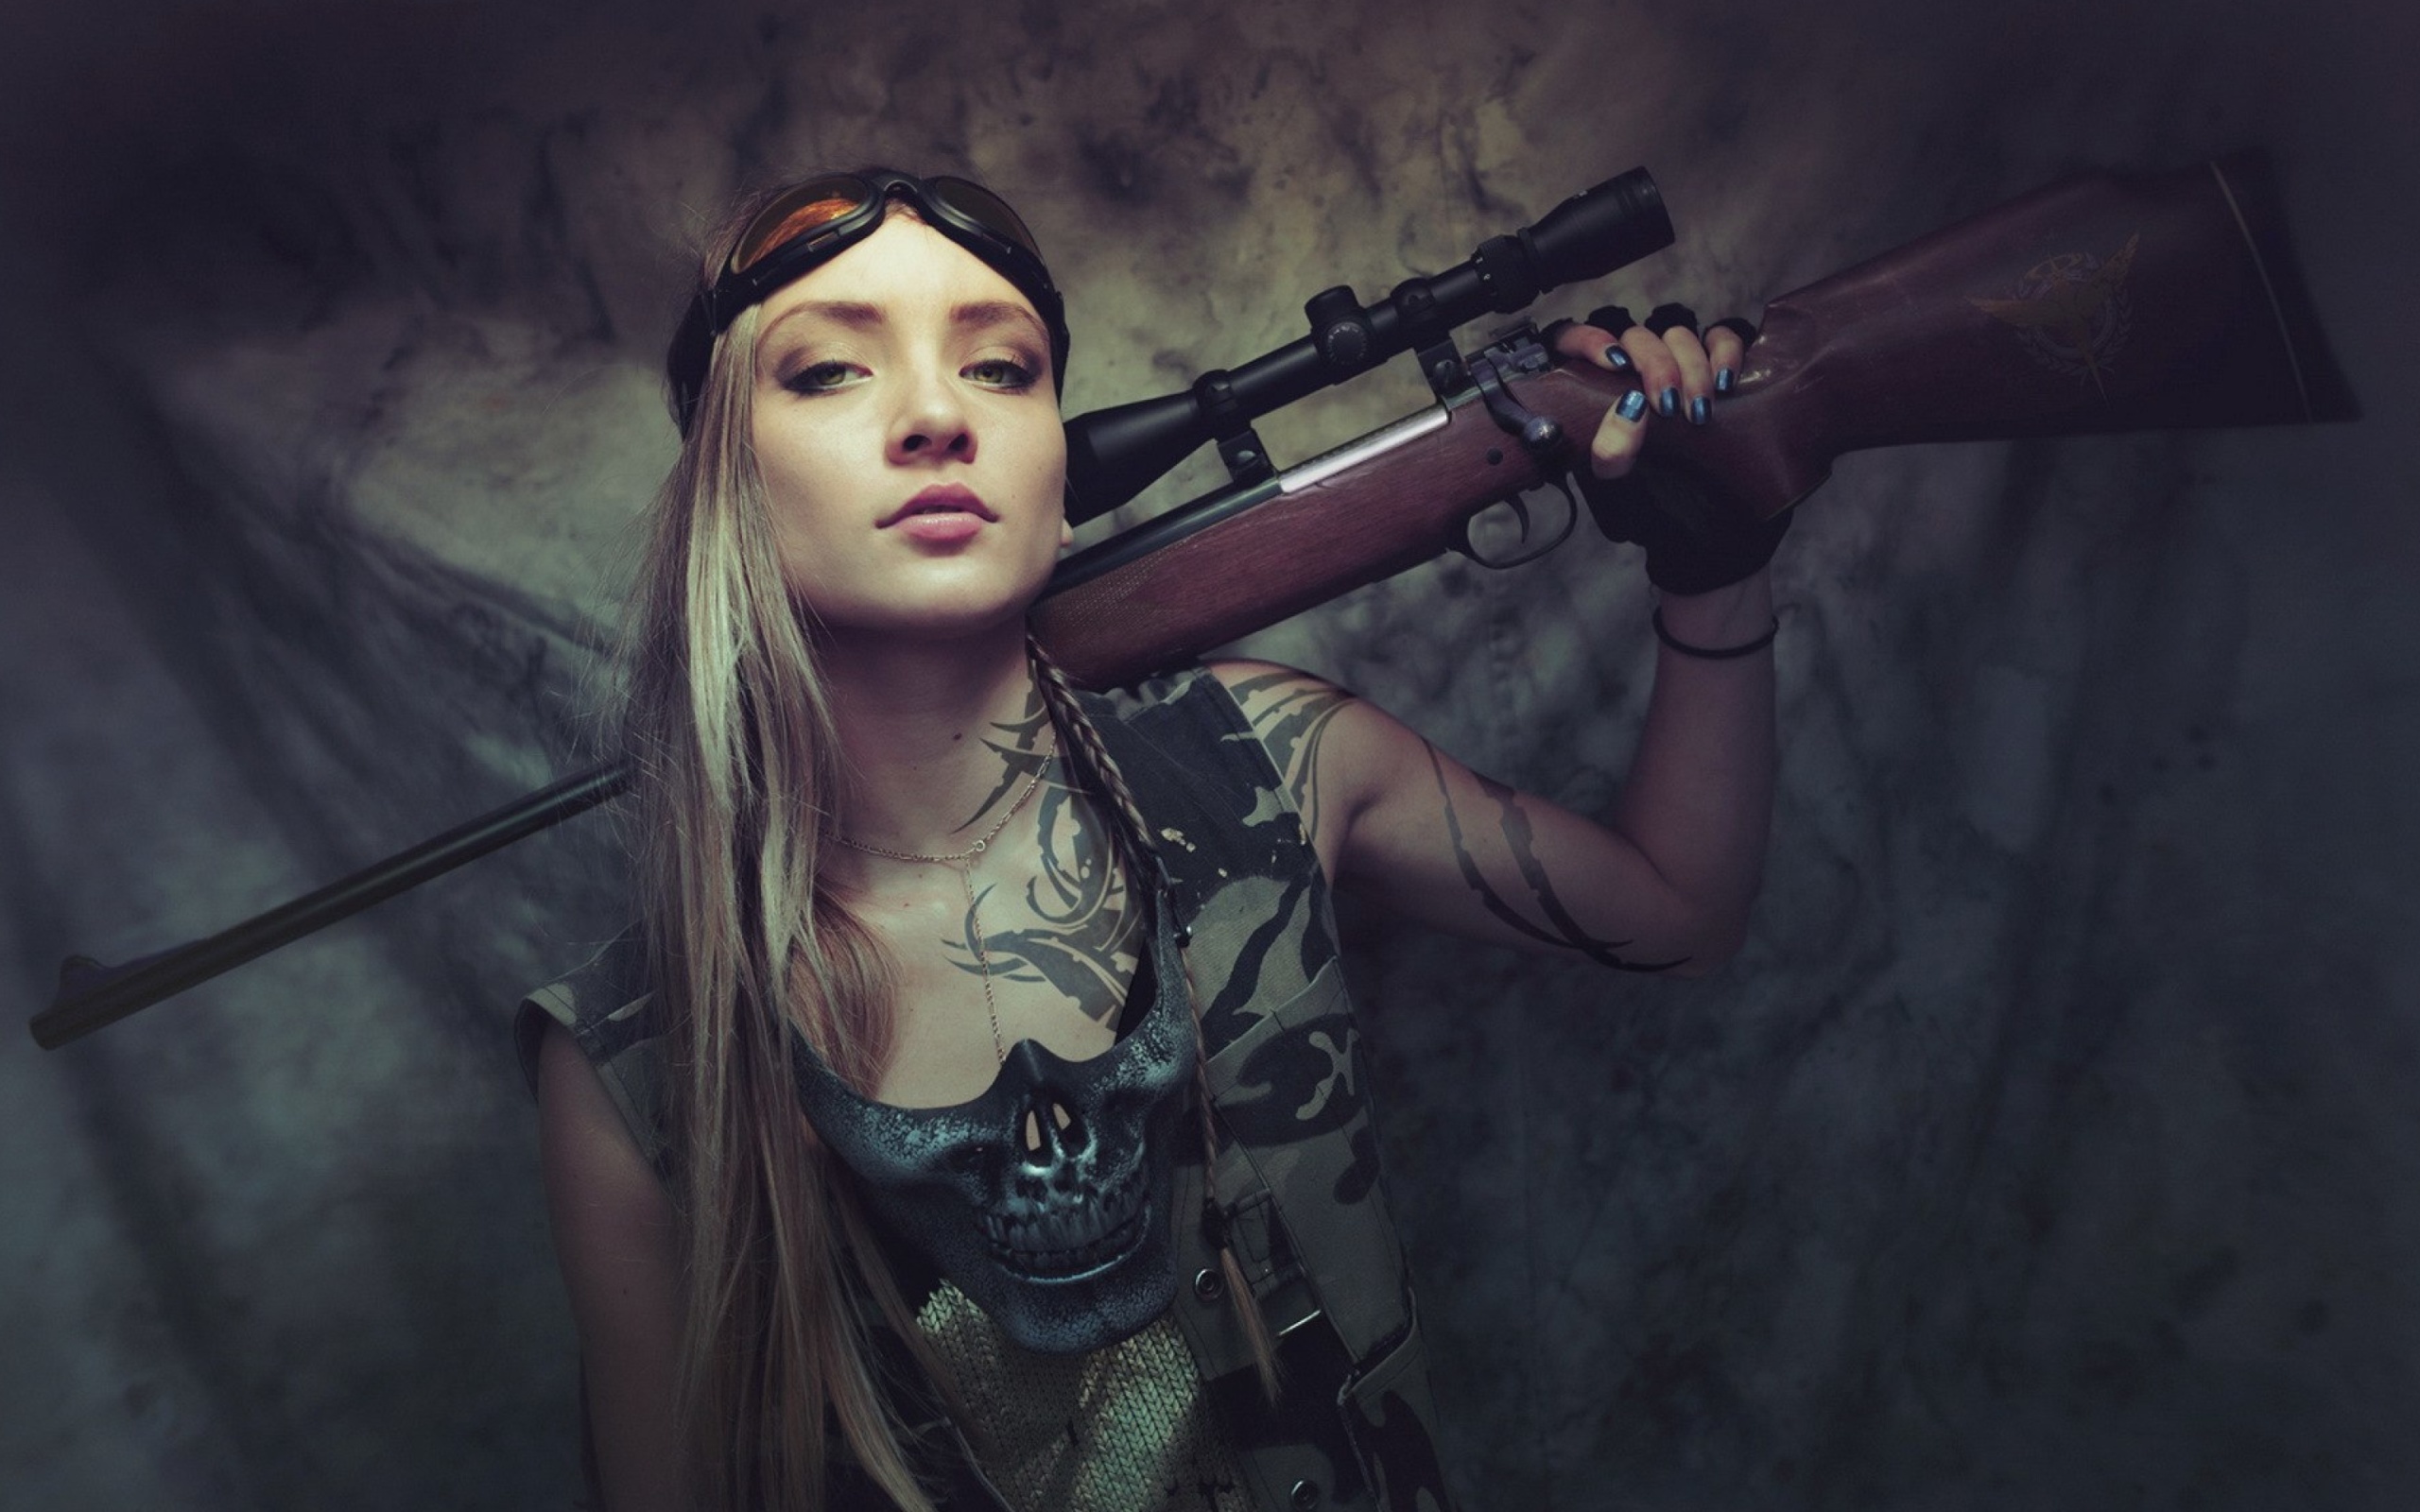 Sfondi Soldier girl with a sniper rifle 2560x1600